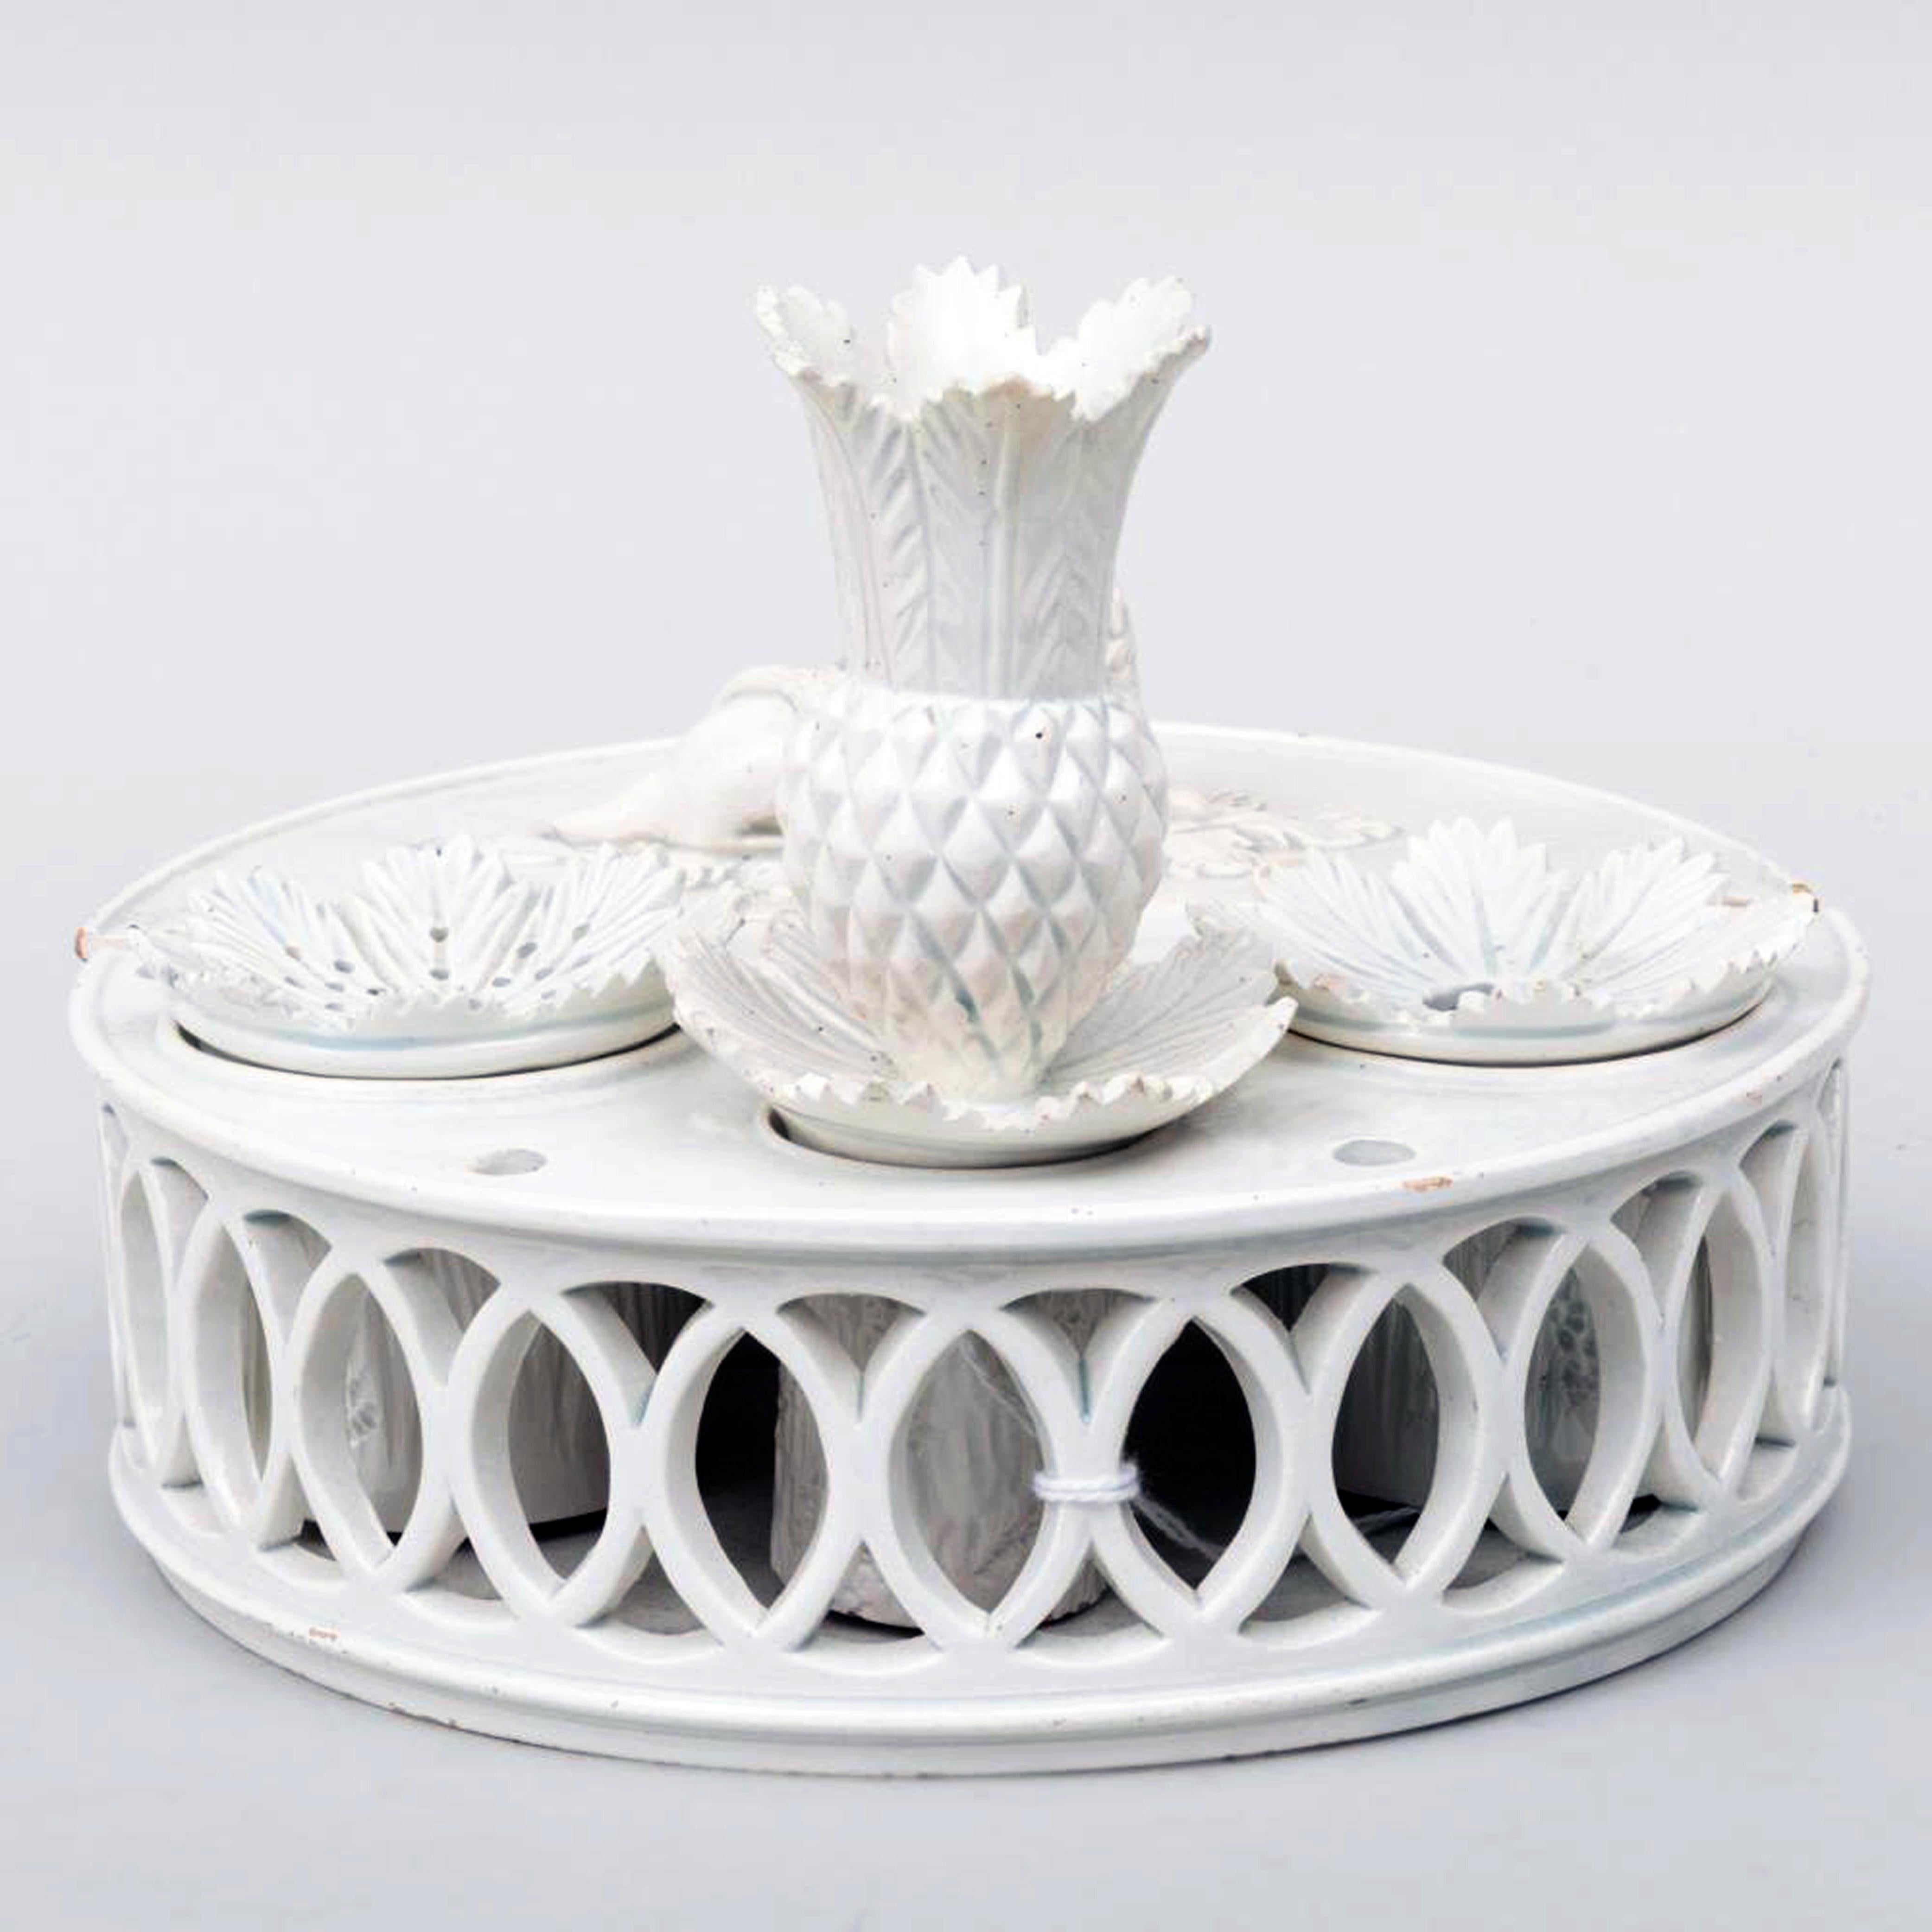 Rare Pearlware Ink Stand with pineapple-shaped candleholder,
Sewells, St. Anthonys Pottery, Newcastle,
Circa 1804-20.

A wonderful pearlware inkstand complete with all its parts. The Stand consists of a lower circular section with an impressed